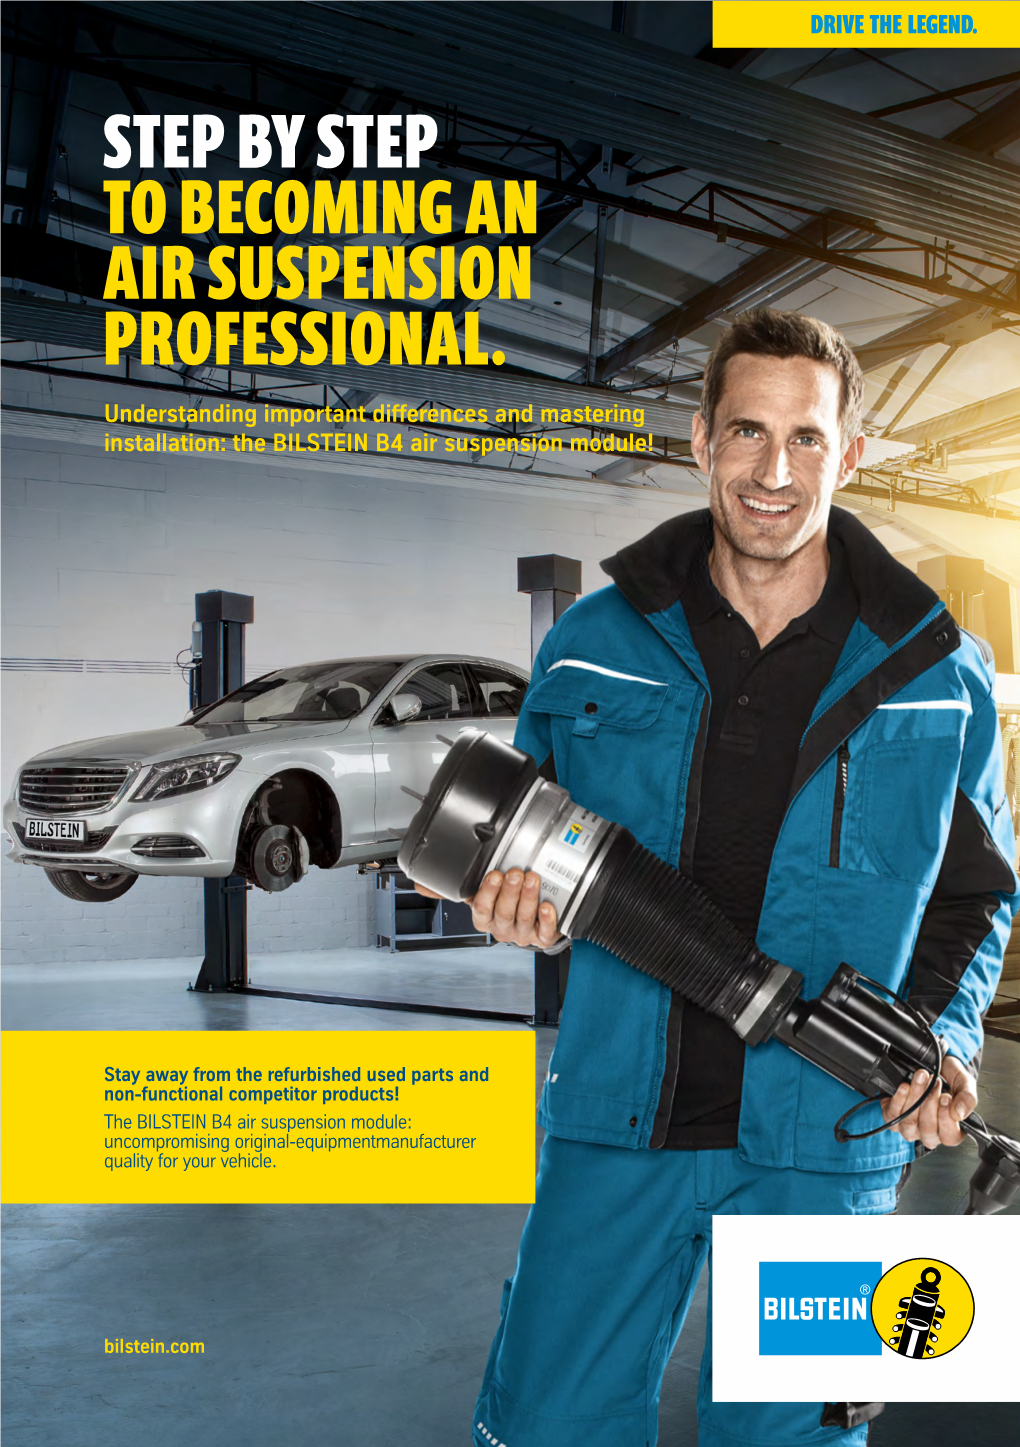 STEP by STEP to BECOMING an AIR SUSPENSION PROFESSIONAL. Understanding Important Differences and Mastering Installation: the BILSTEIN B4 Air Suspension Module!